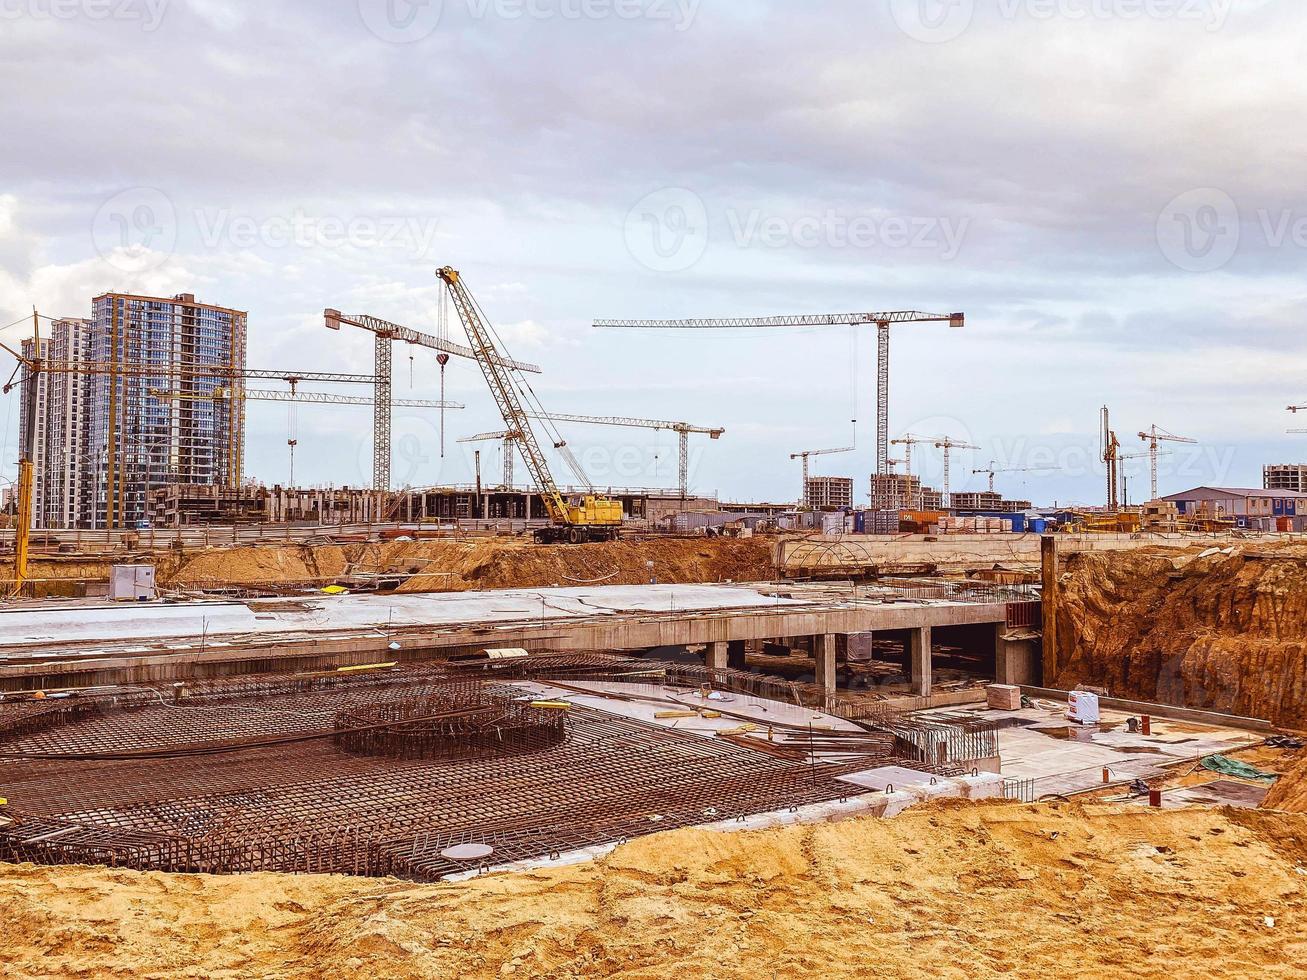 construction of a new residential area in the city center. for the construction of multi-storey buildings there are high-rise cranes. carrying large loads photo